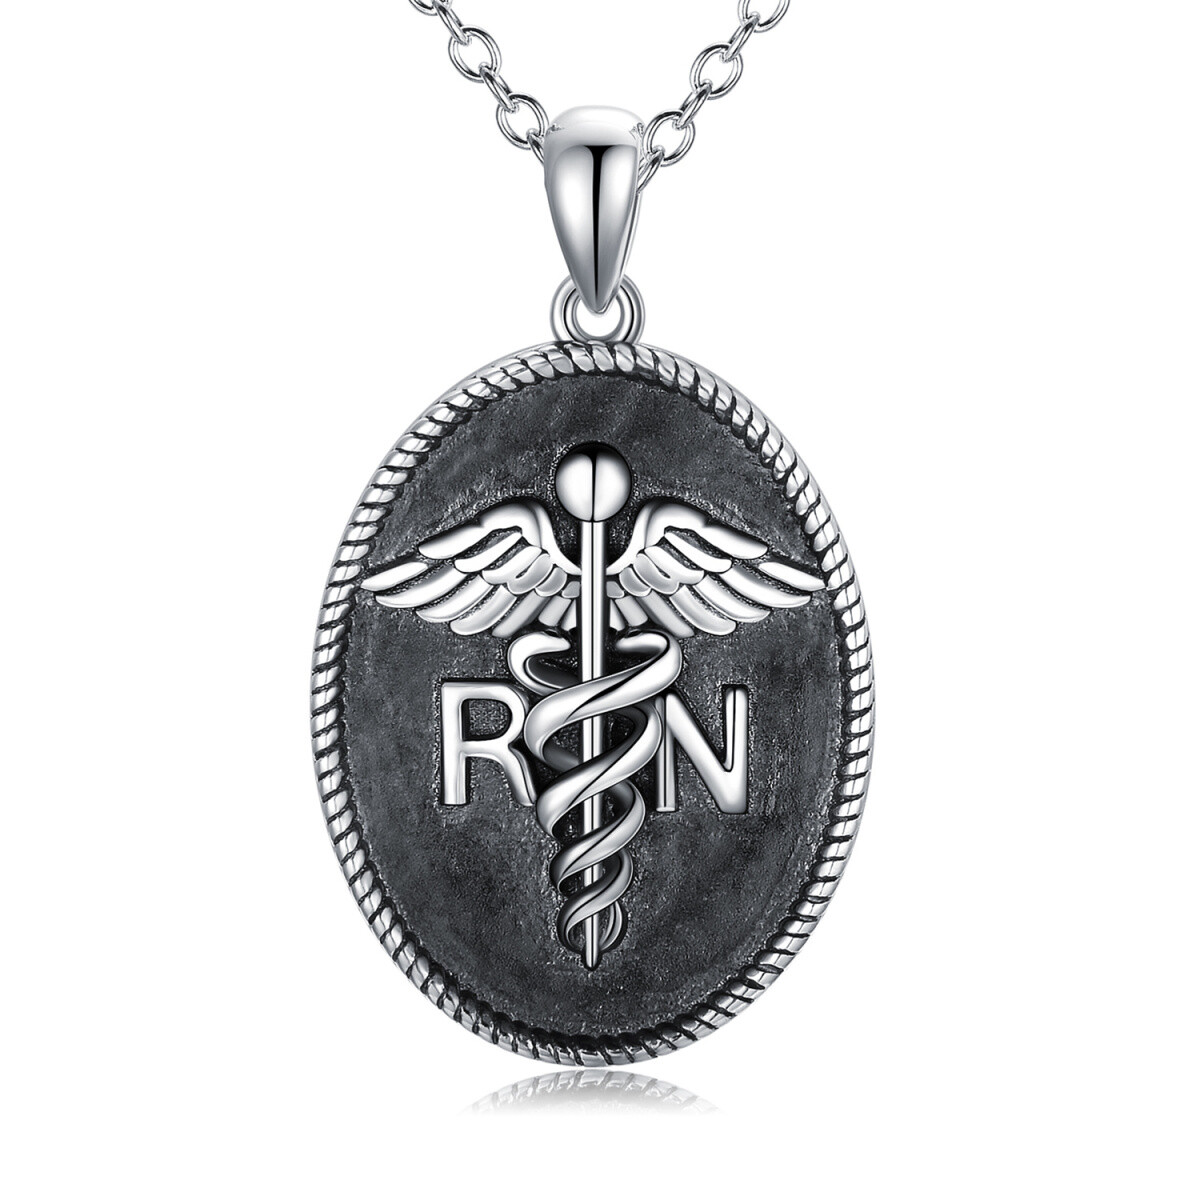 Sterling Silver Caduceus & Oval Shaped Pendant Necklace with Engraved Word-1